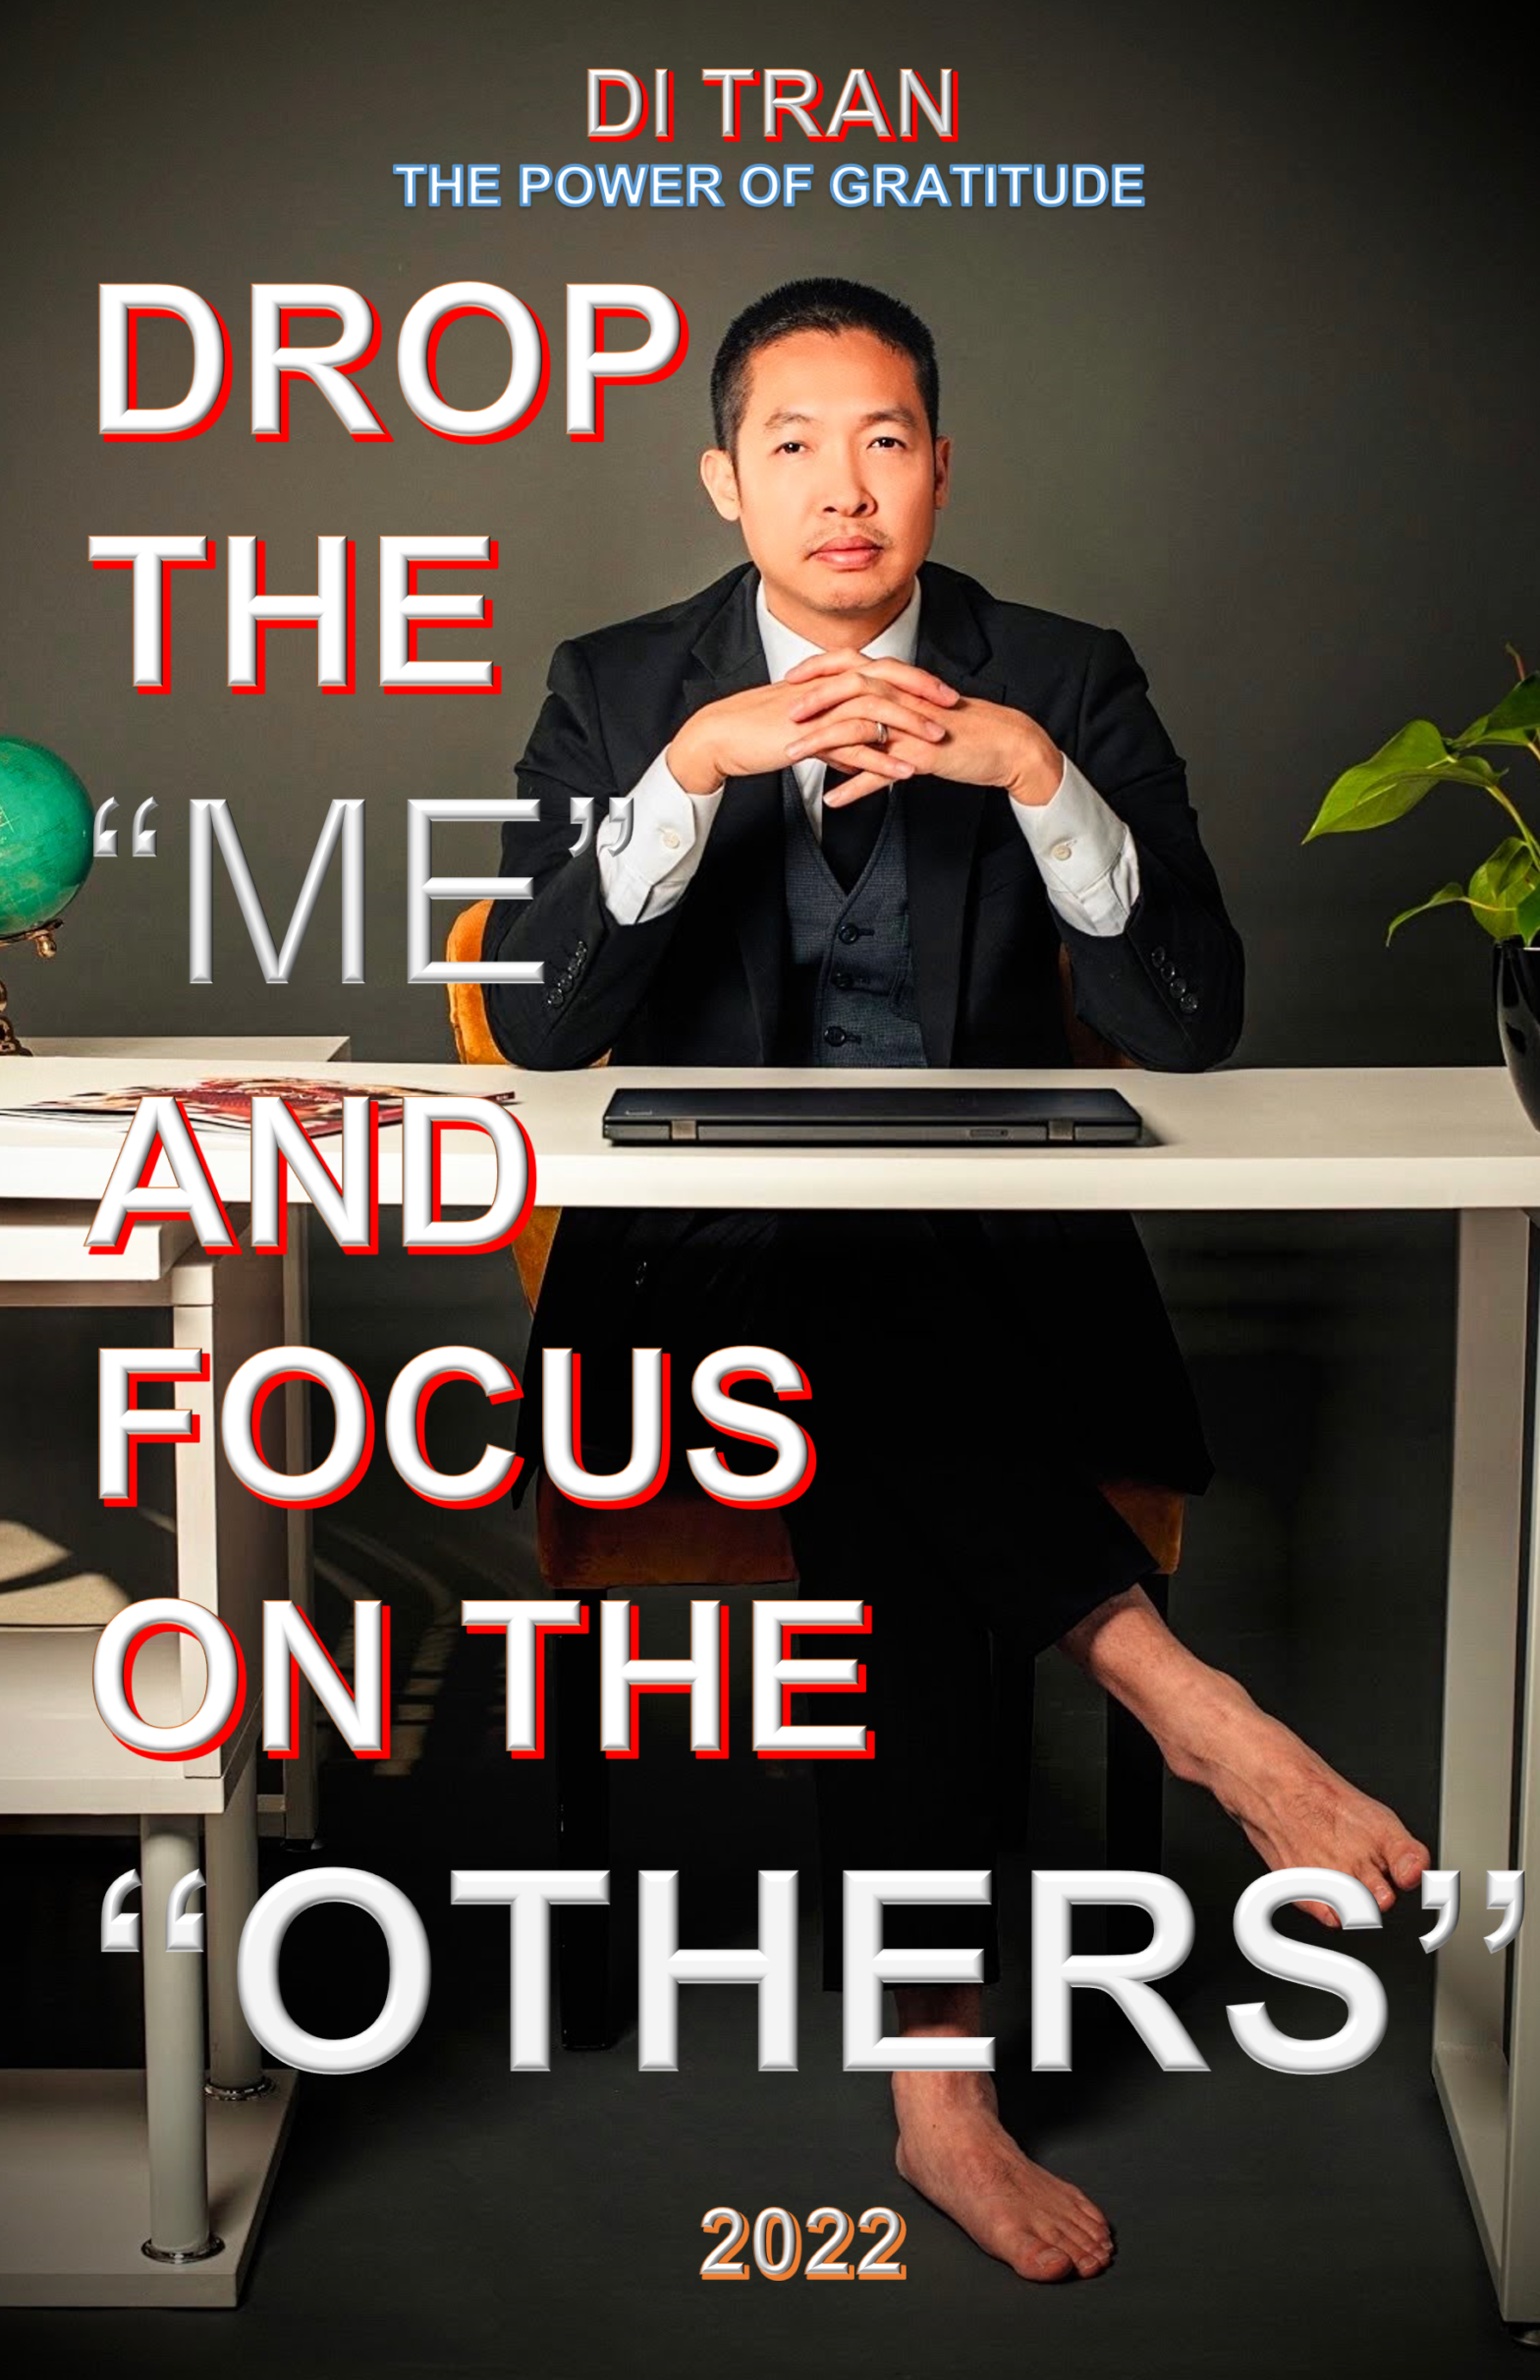 Thomas Garry Ransdell – Di Tran’s First Official American Mentor – Thank you – Snippet of “Drop the ME and Focus on the OTHERS” – Book by Di Tran